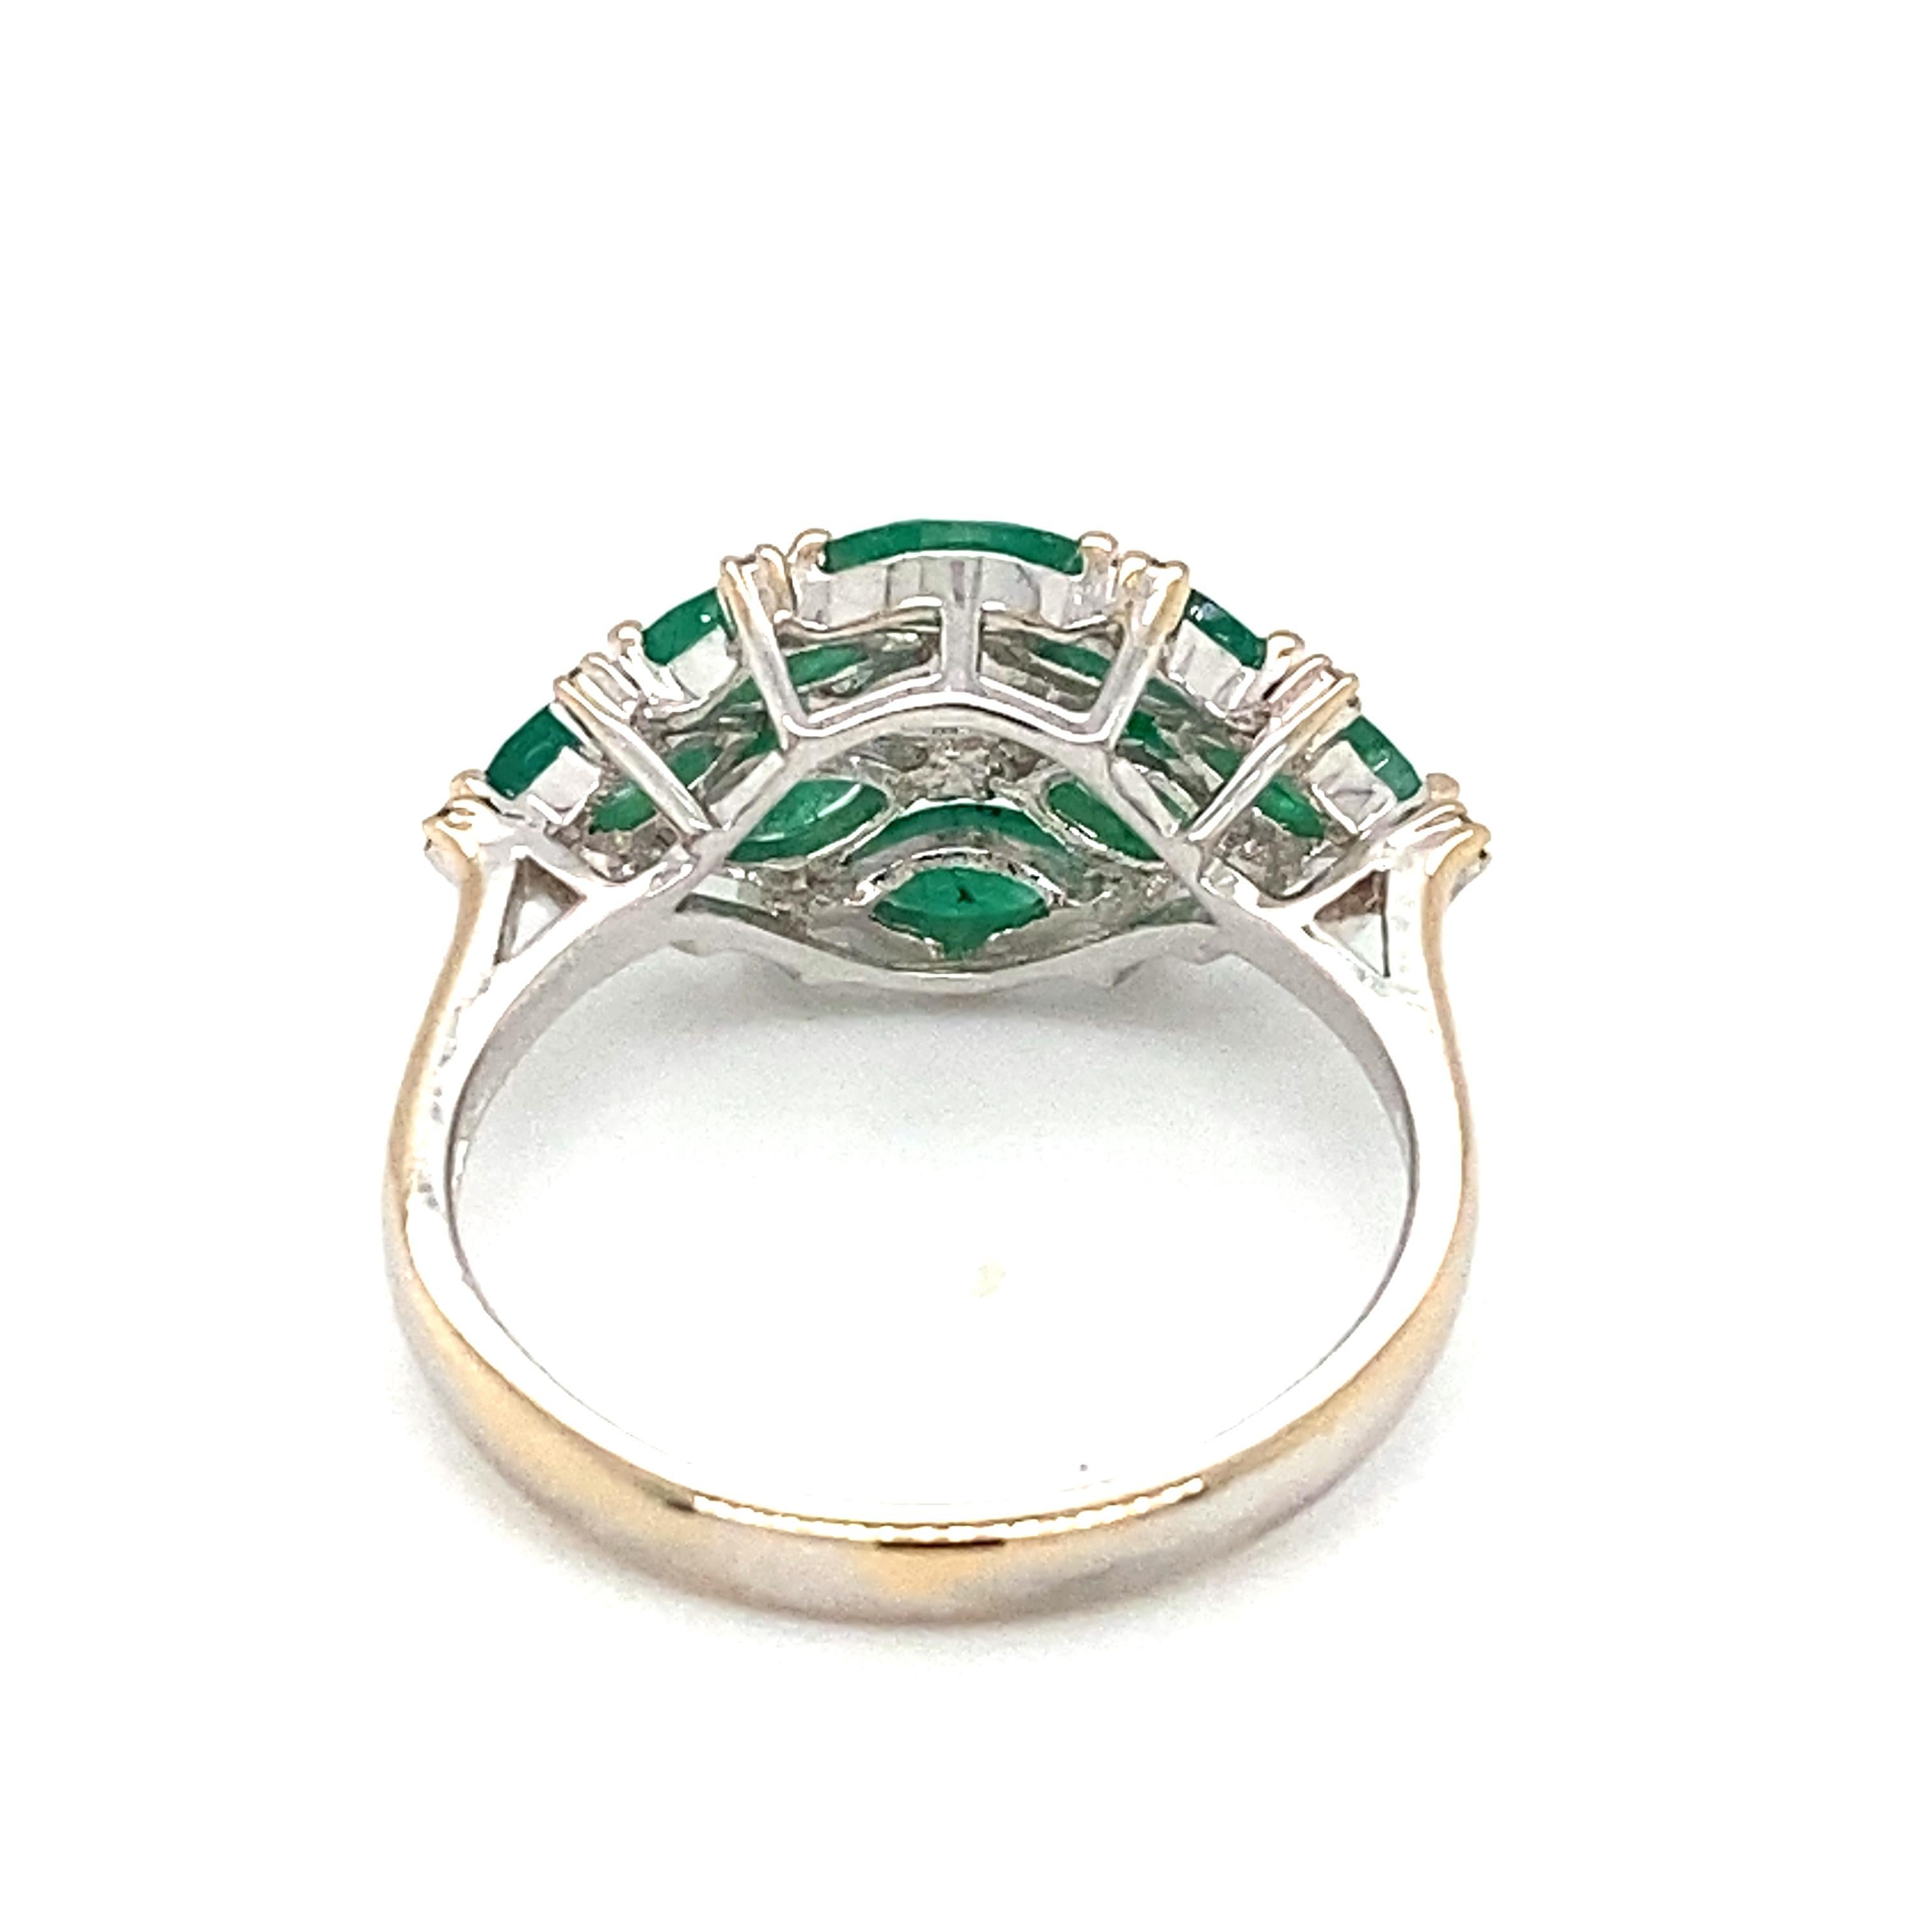 Item Details: This ring by Damas Jewelry has marquise emeralds with accent diamonds. The contrast of colors from the emeralds to the white gold with a pop of diamond sparkle is absolutely stunning. 

Circa: 2000s
Metal Type: 18 Karat White